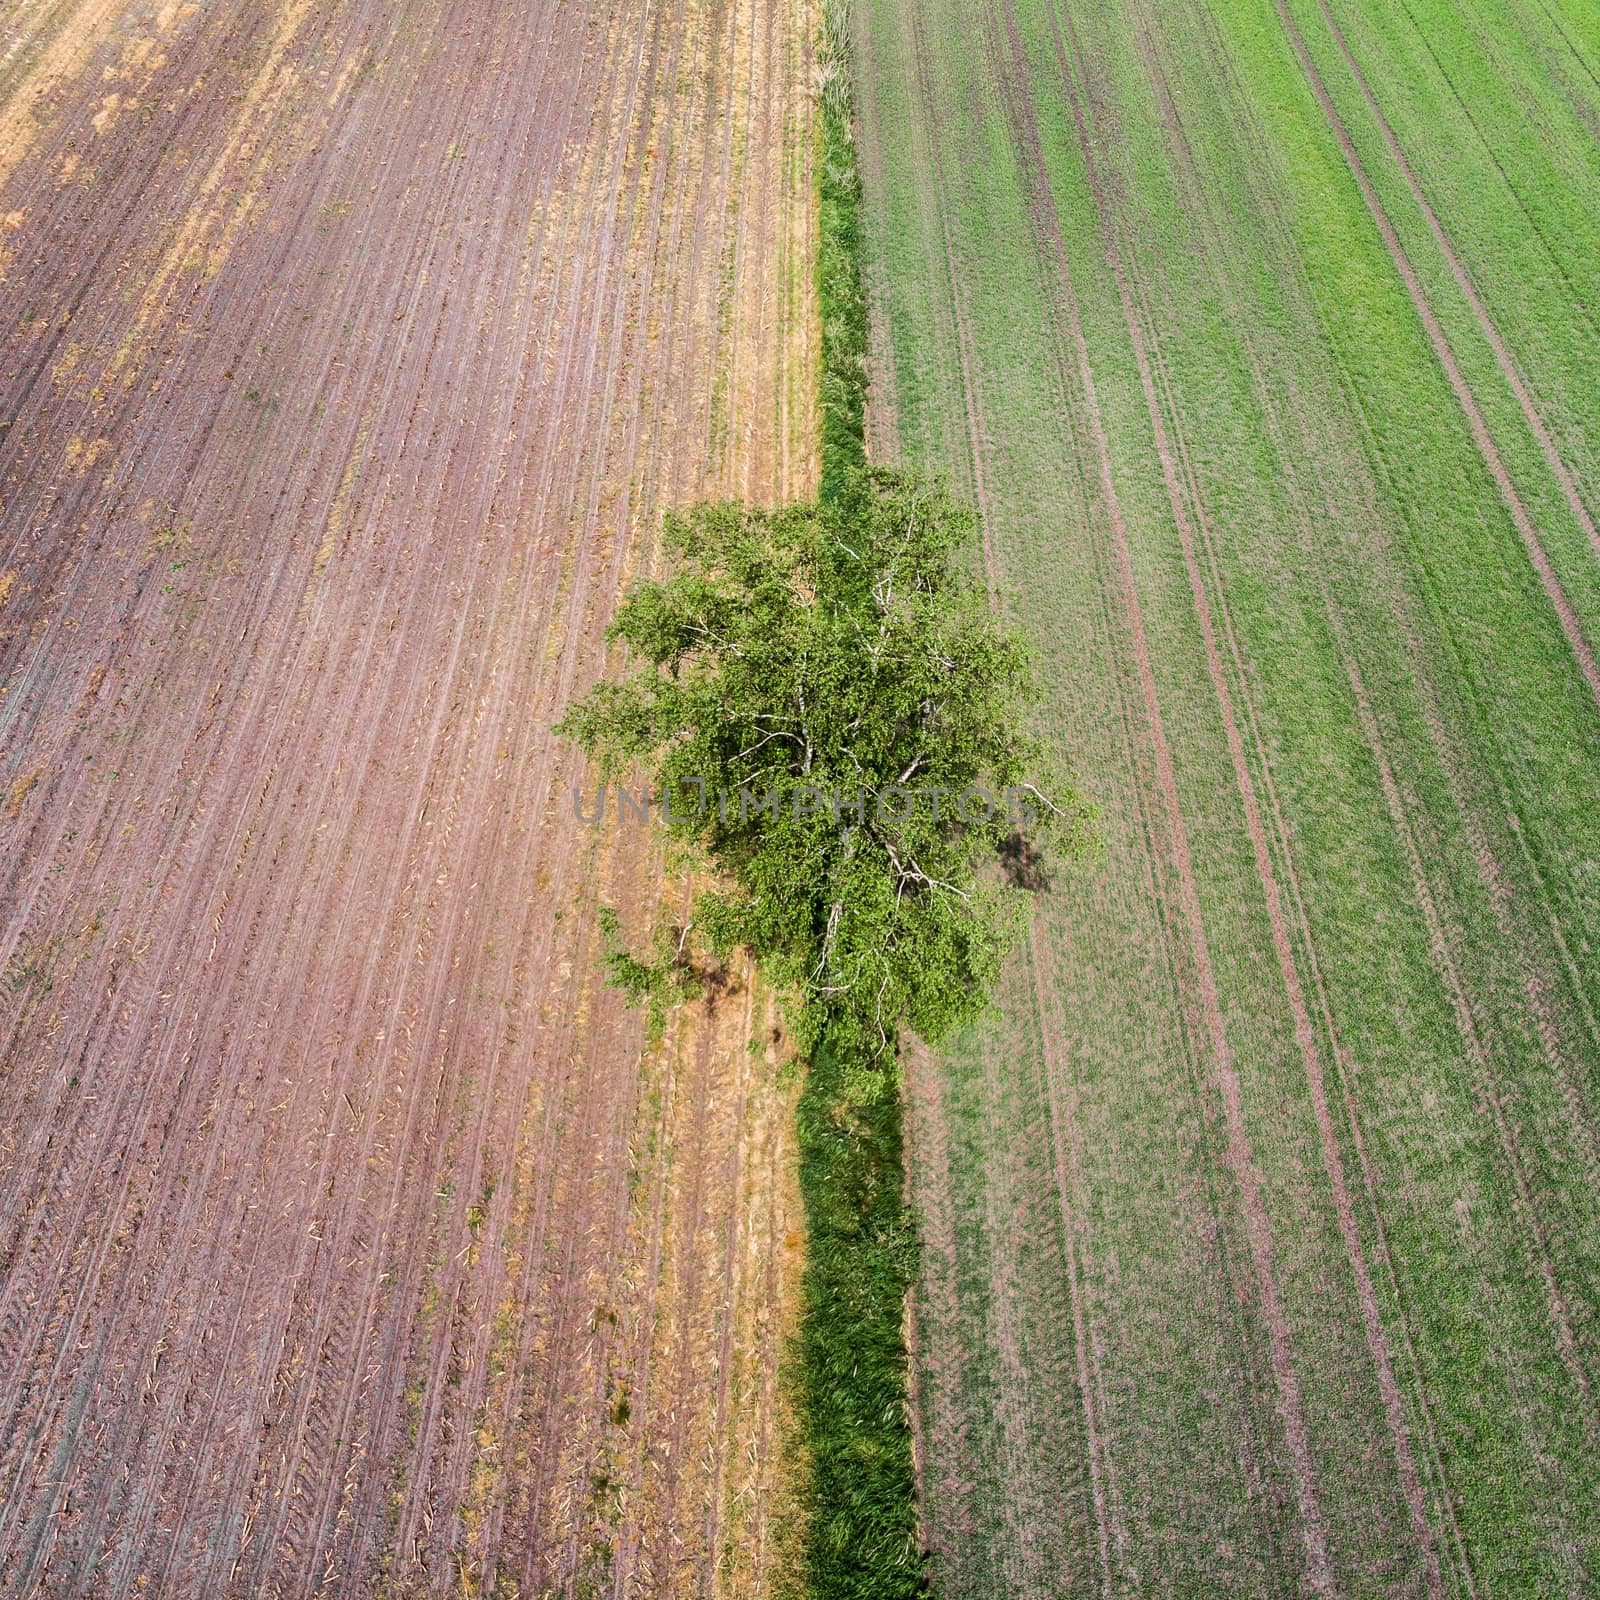 Aerial view of a single tree taken at an angle from a great height at the border of two different farmland areas in Germany near Gifhorn by geogif